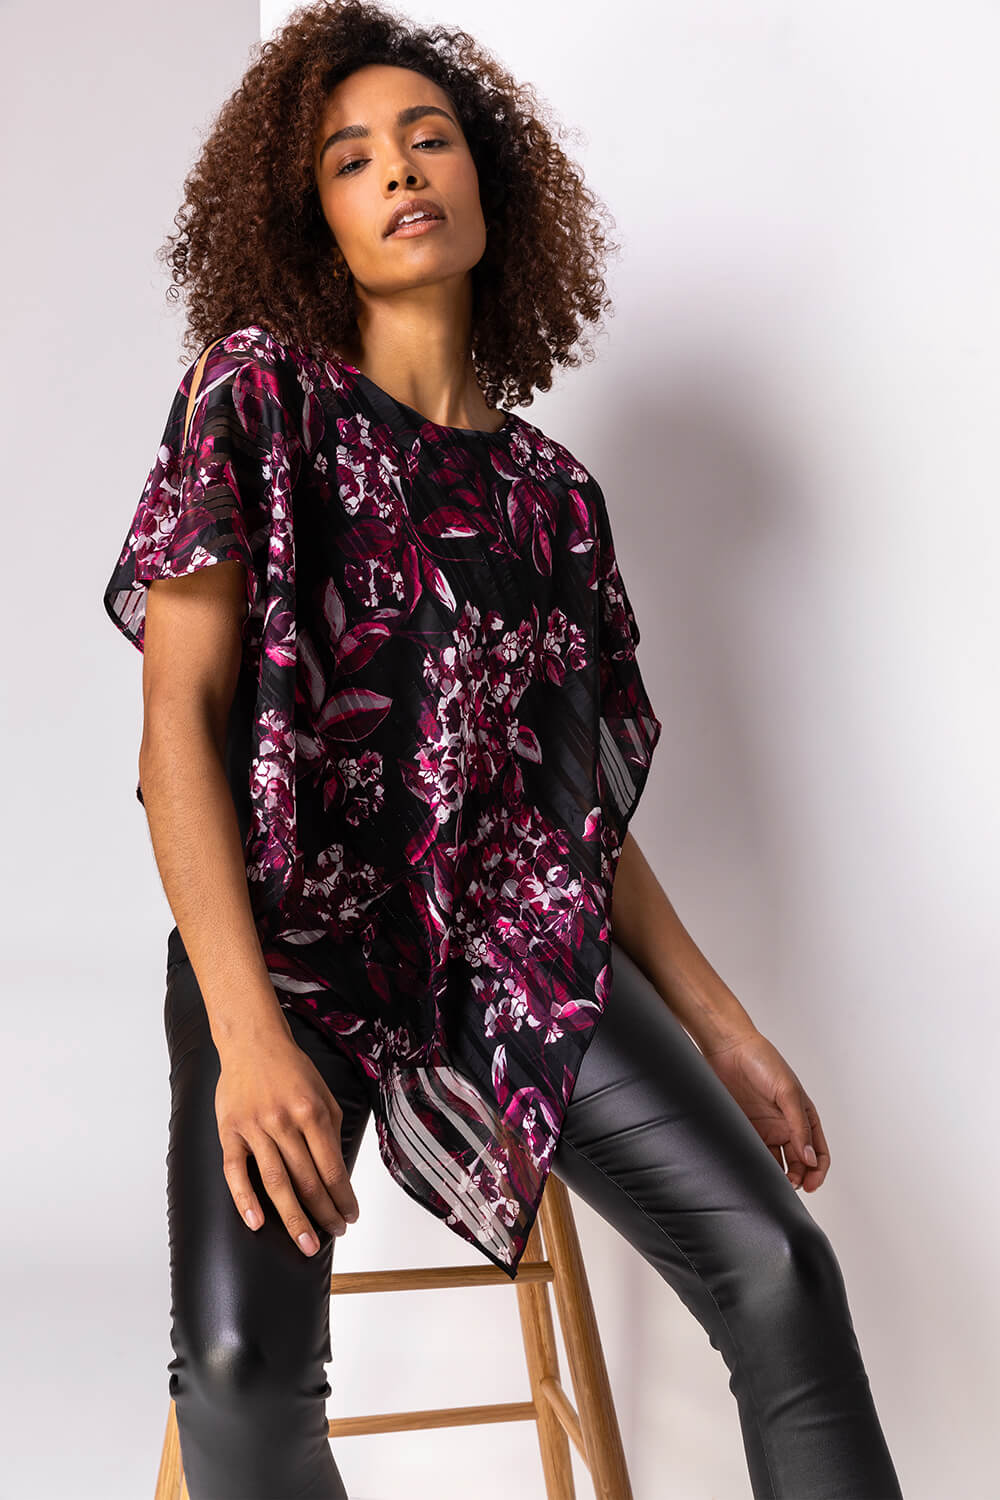 Port Burnout Floral Asymmetric Overlay Top, Image 5 of 5